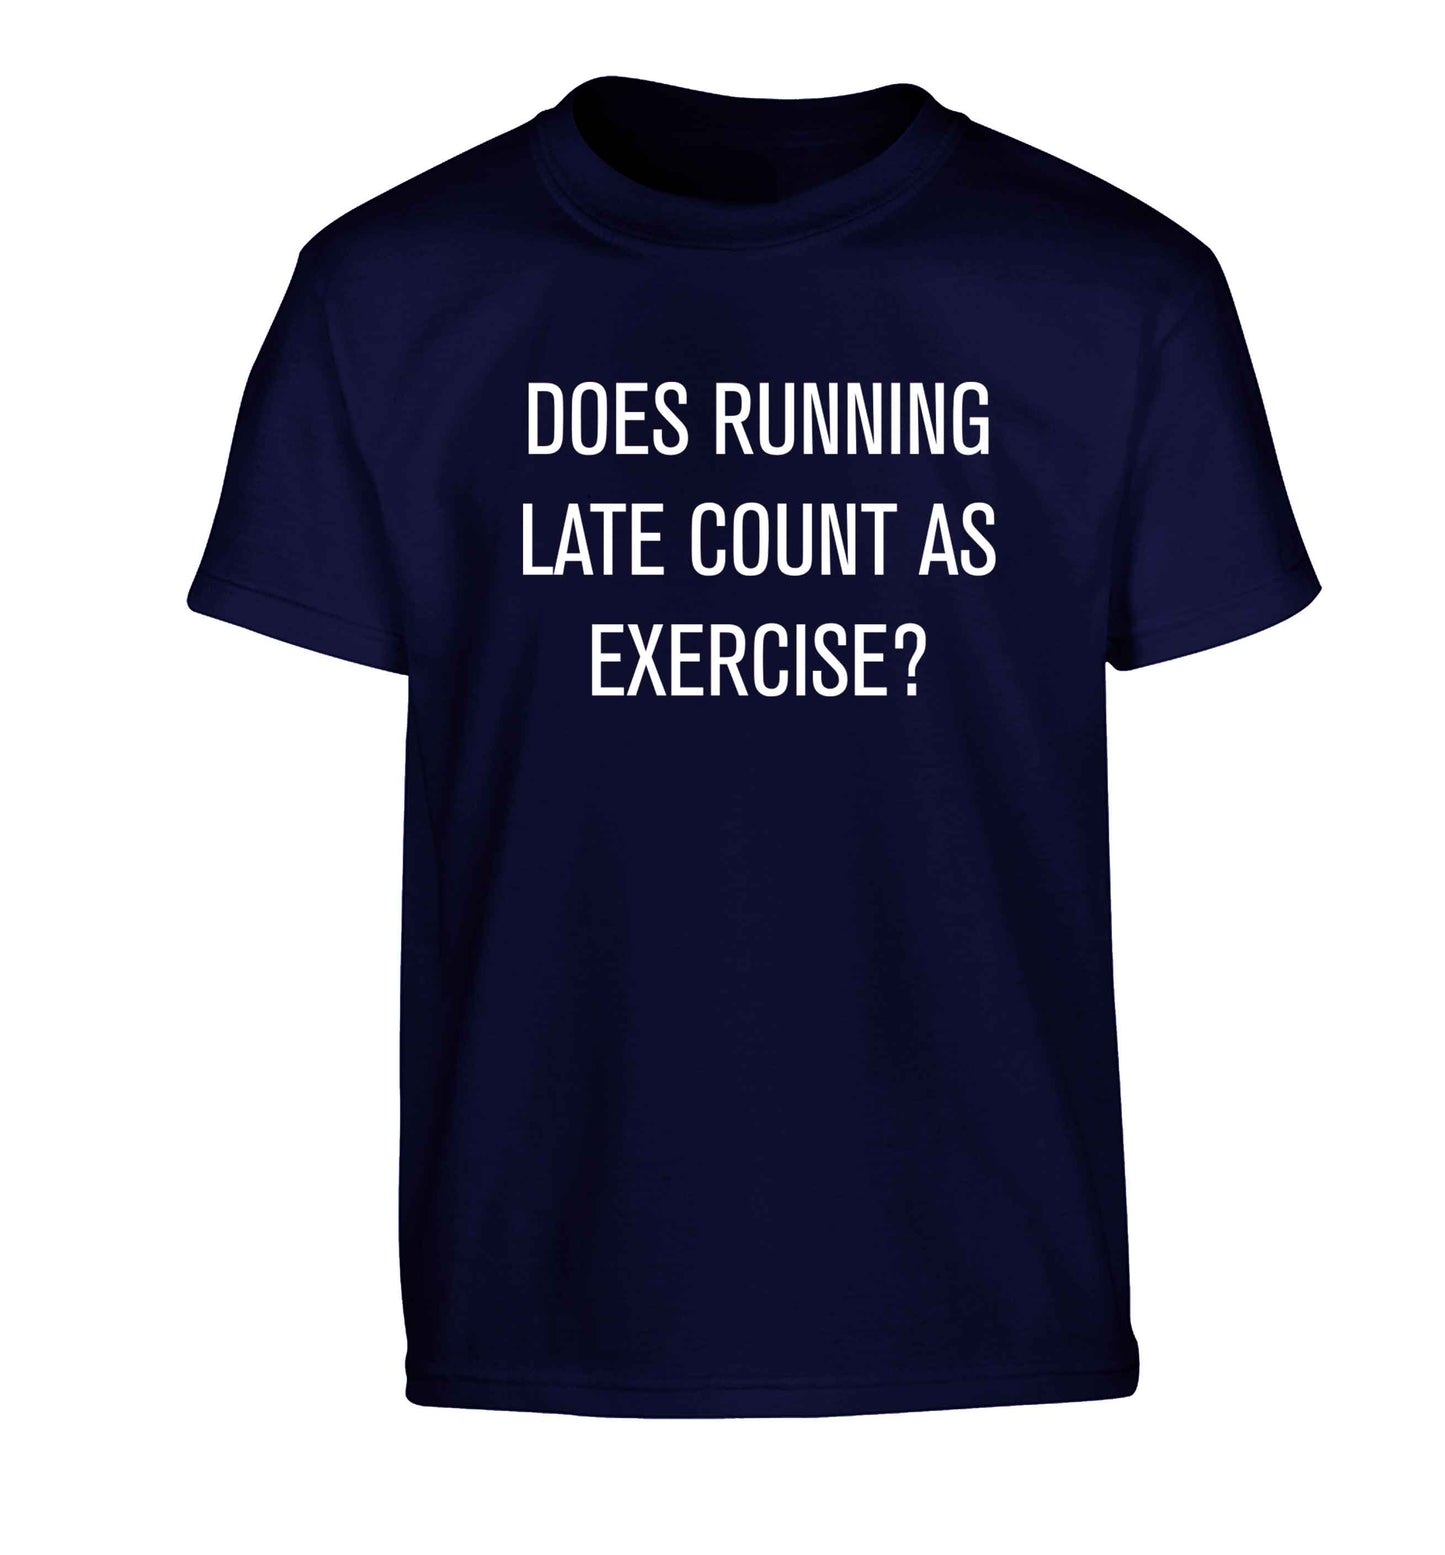 Does running late count as exercise? Children's navy Tshirt 12-13 Years